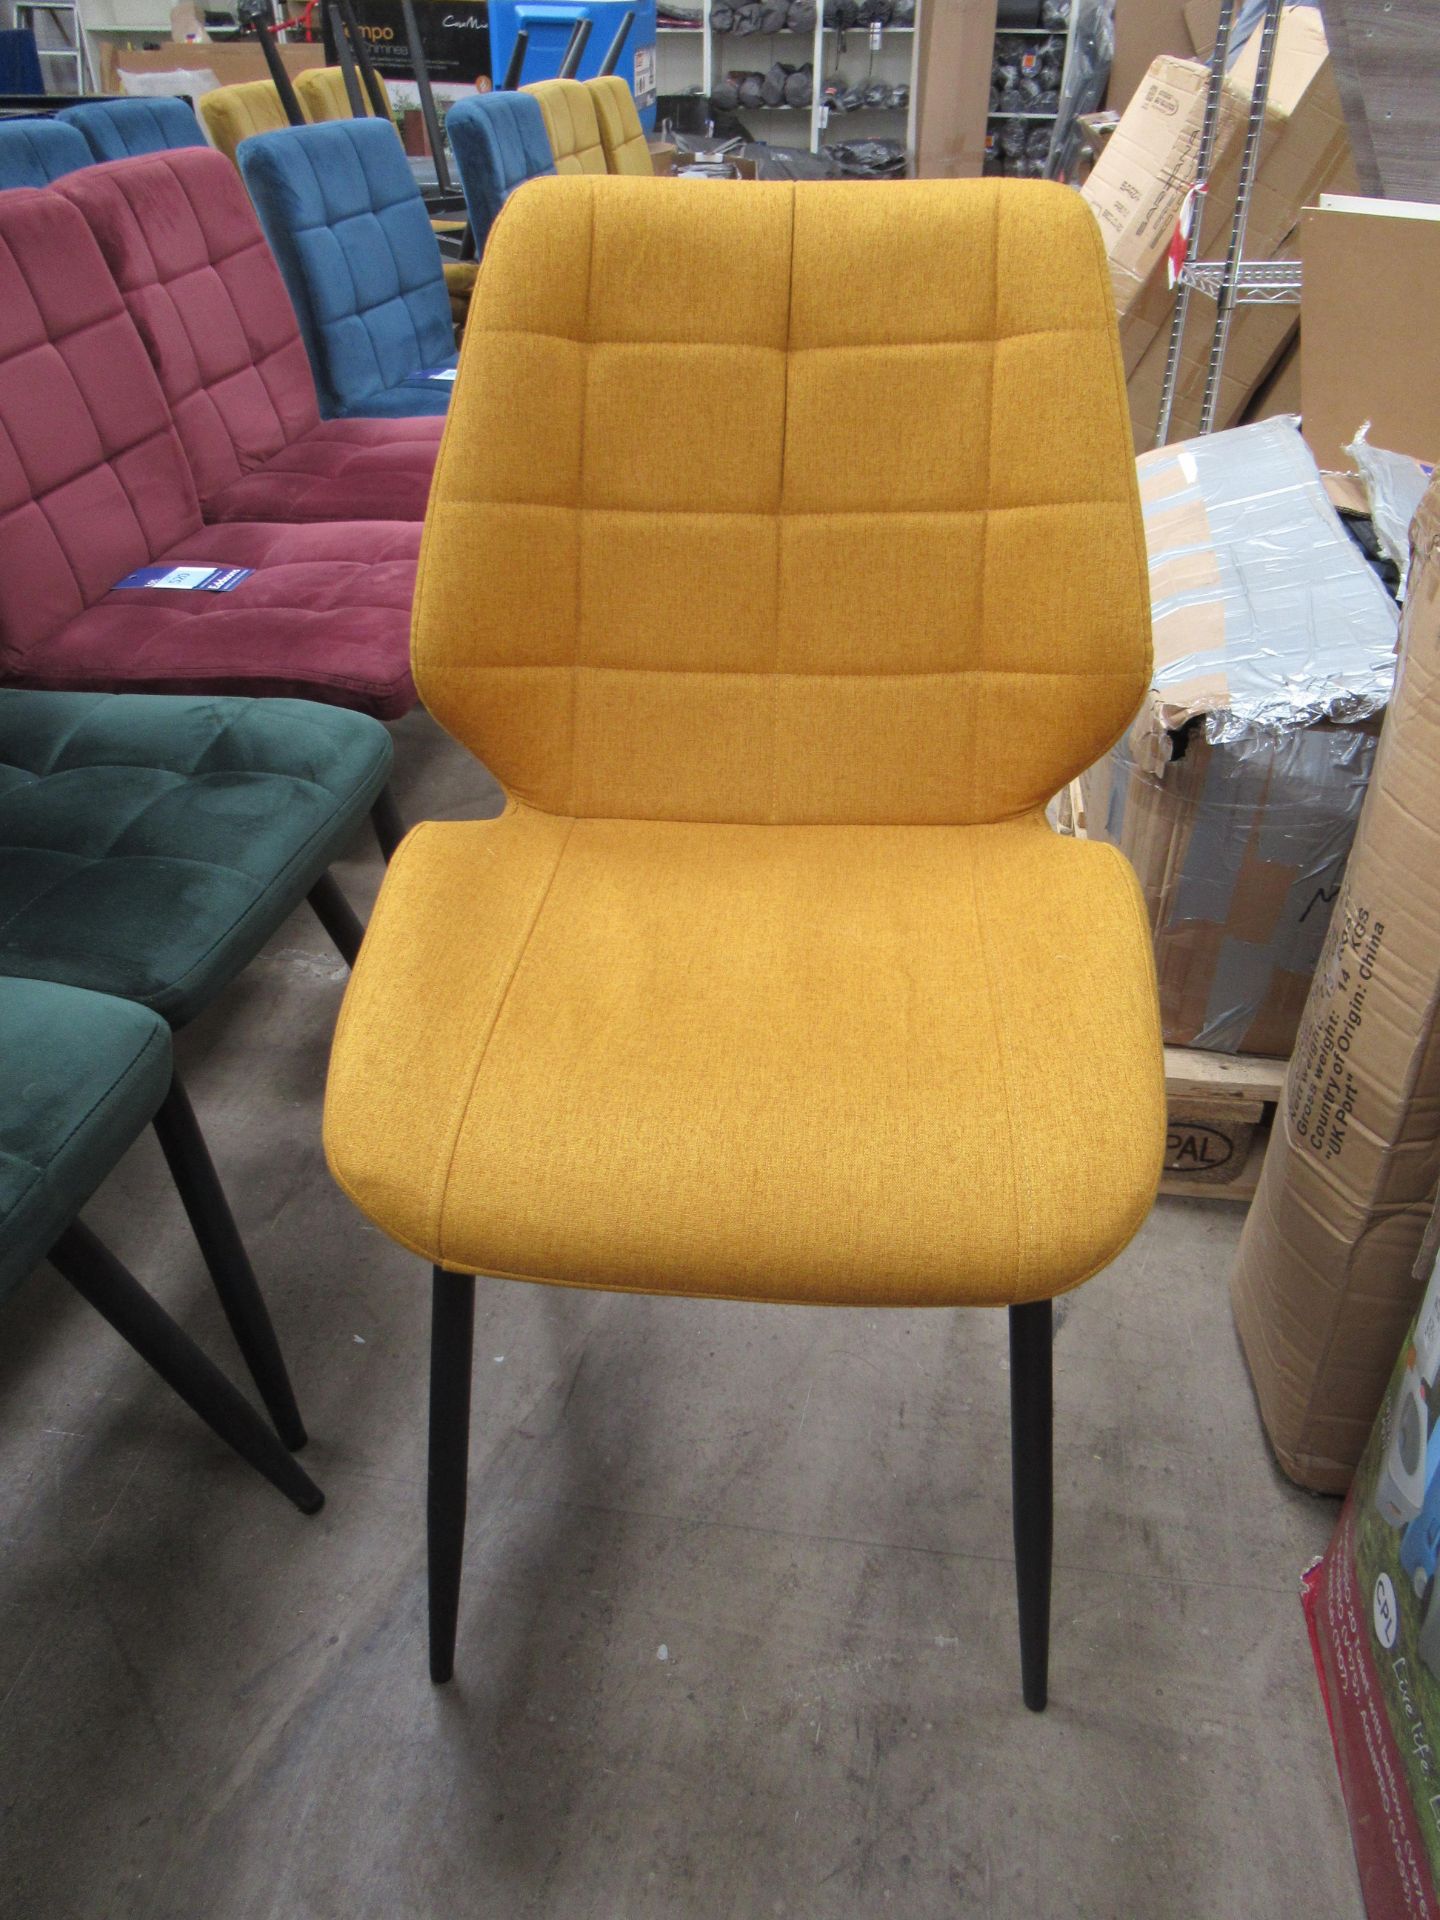 4x Yellow Upholstered Chairs - Image 2 of 2